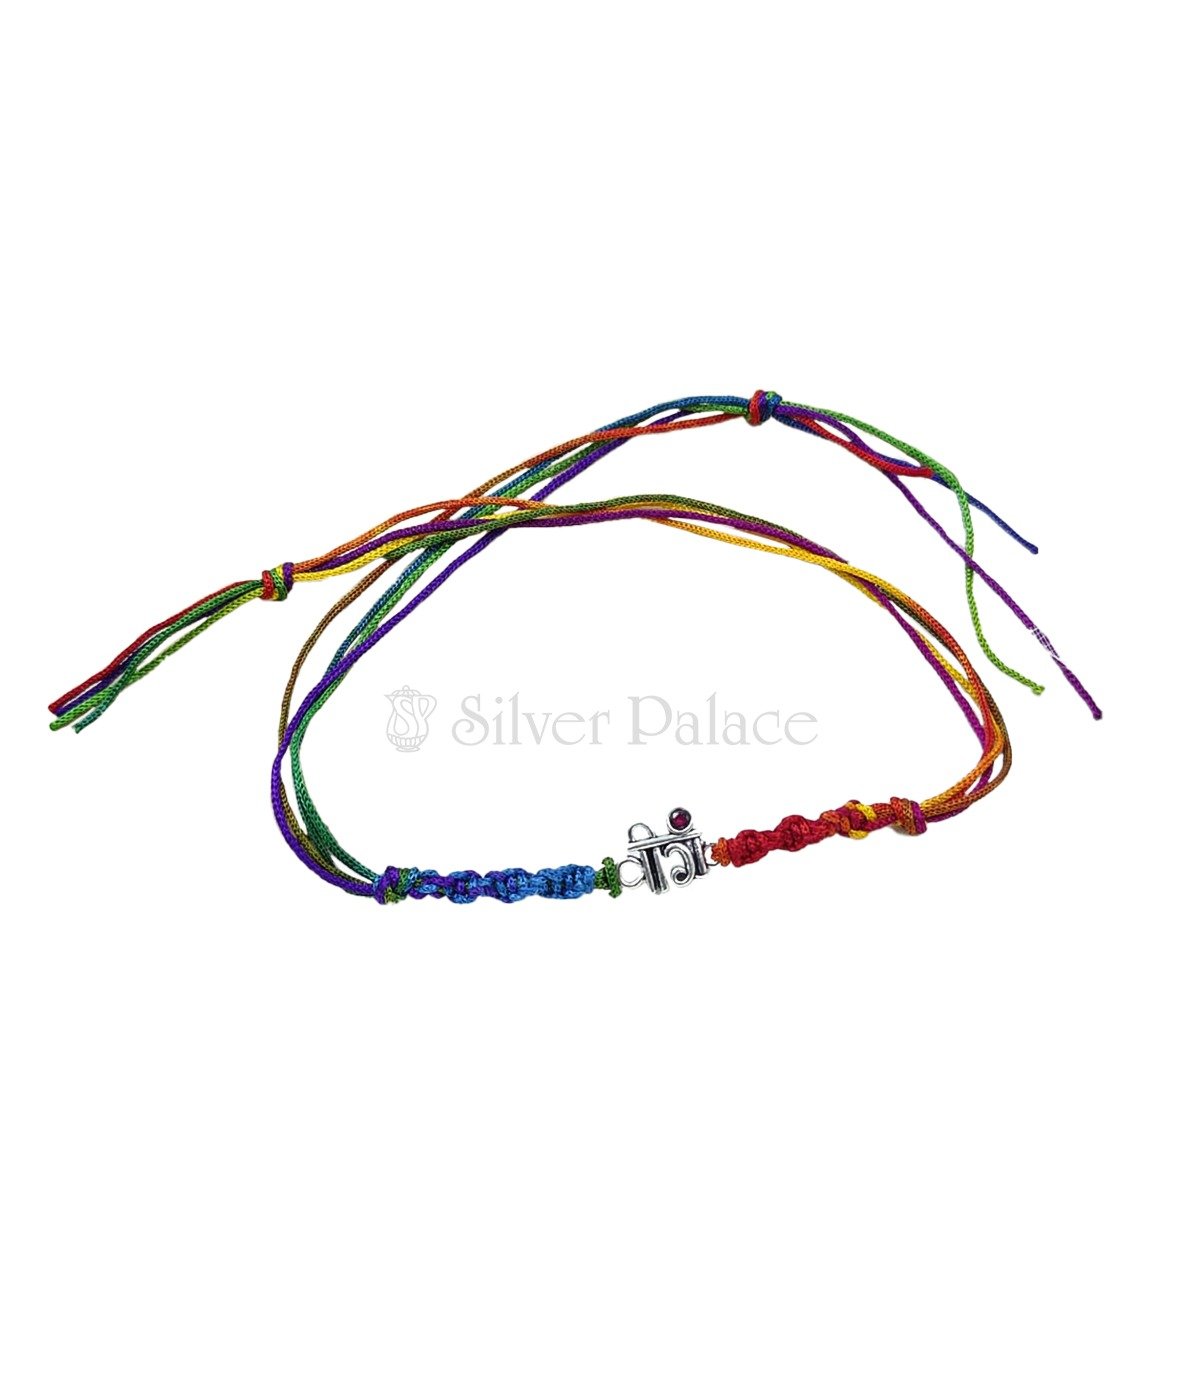 92.5 PURE SILVER RAKHI FOR BROTHERS AND SISTERS